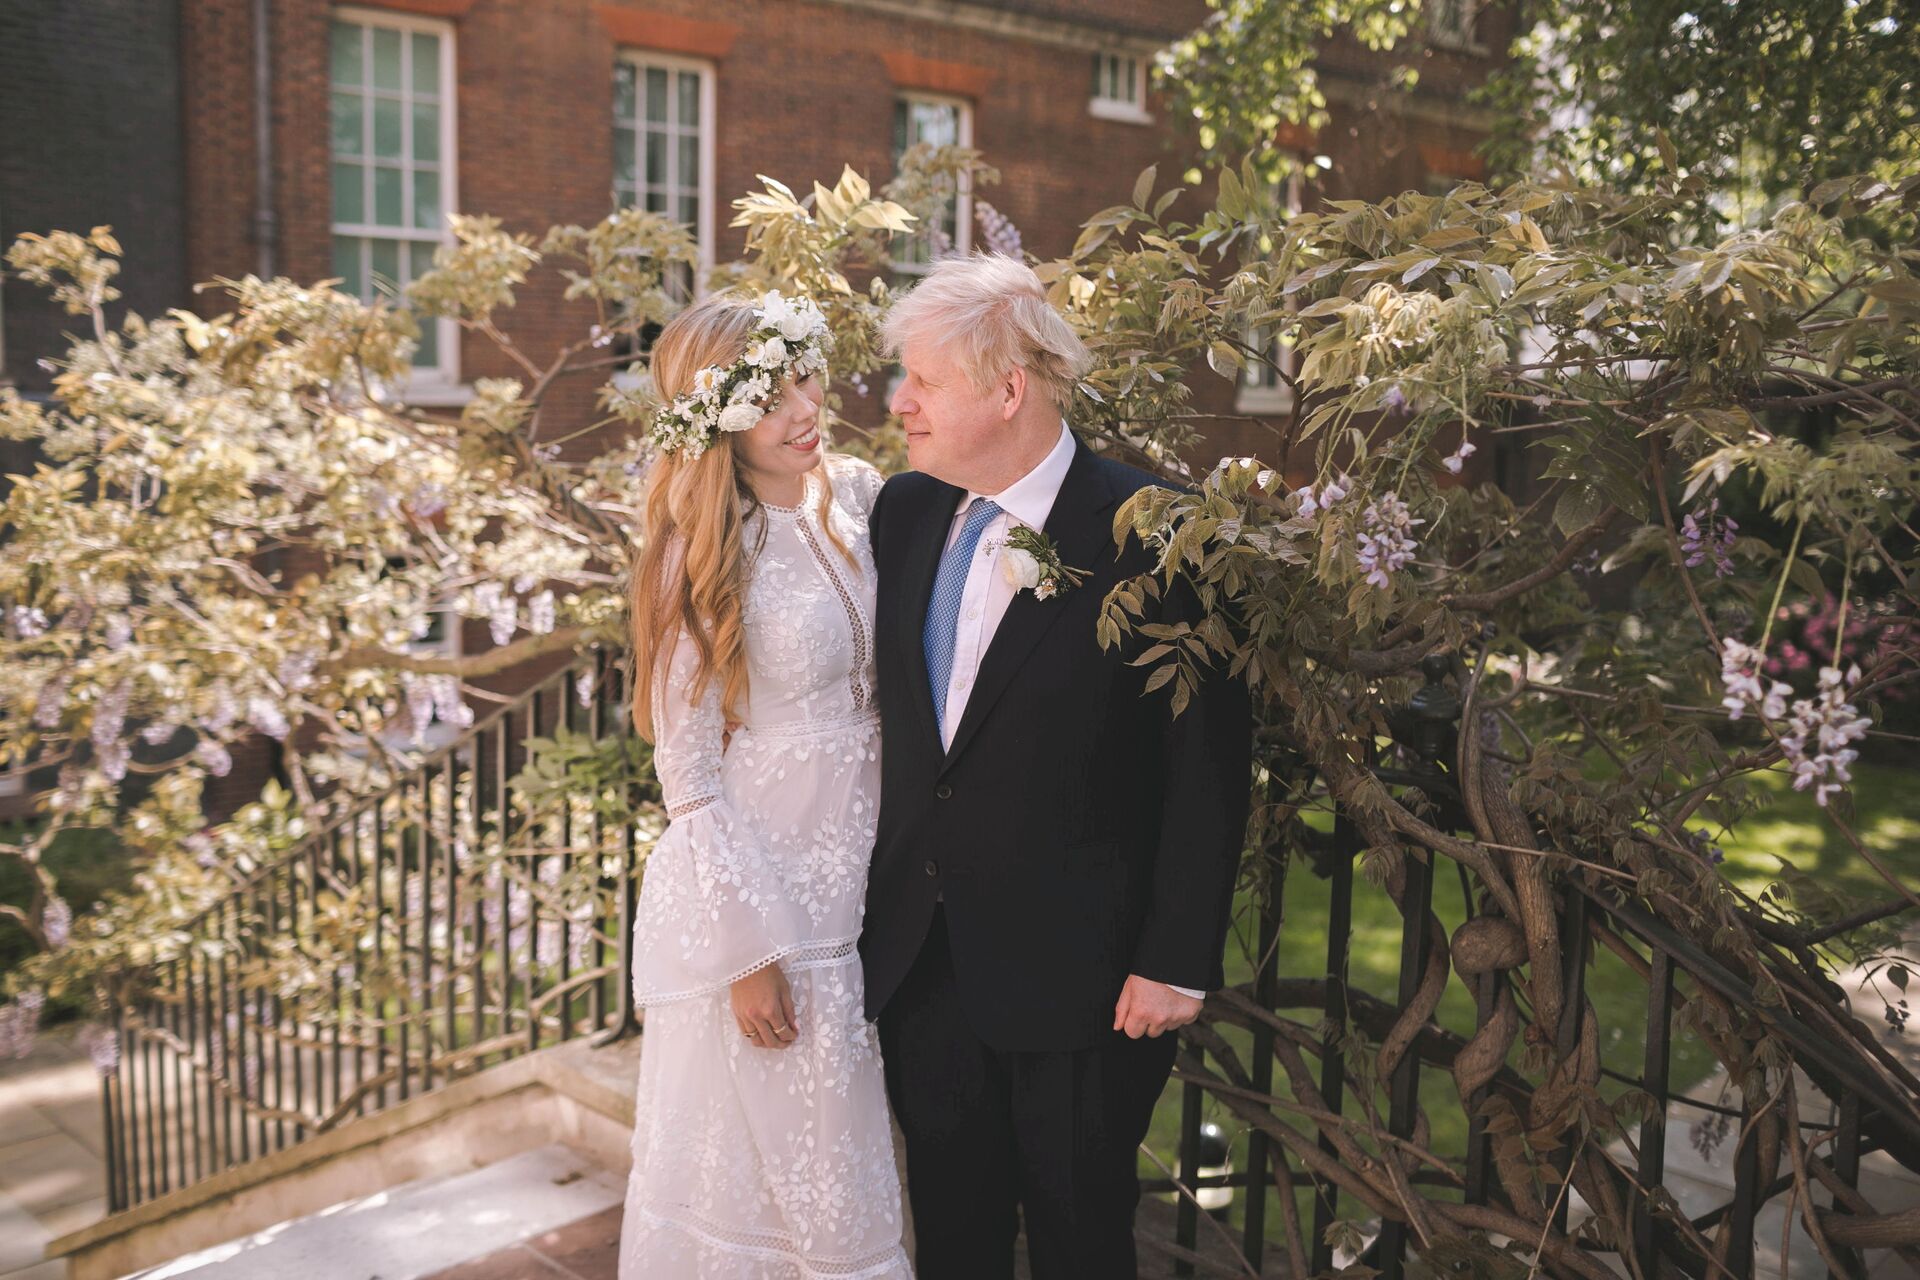 Boris and Carrie Johnson are seen in the garden of 10 Downing Street, after their wedding, in London, Britain May 29, 2021. Picture taken May 29, 2021. Rebecca Fulton/Pool via REUTERS     TPX IMAGES OF THE DAY - Sputnik International, 1920, 09.12.2021